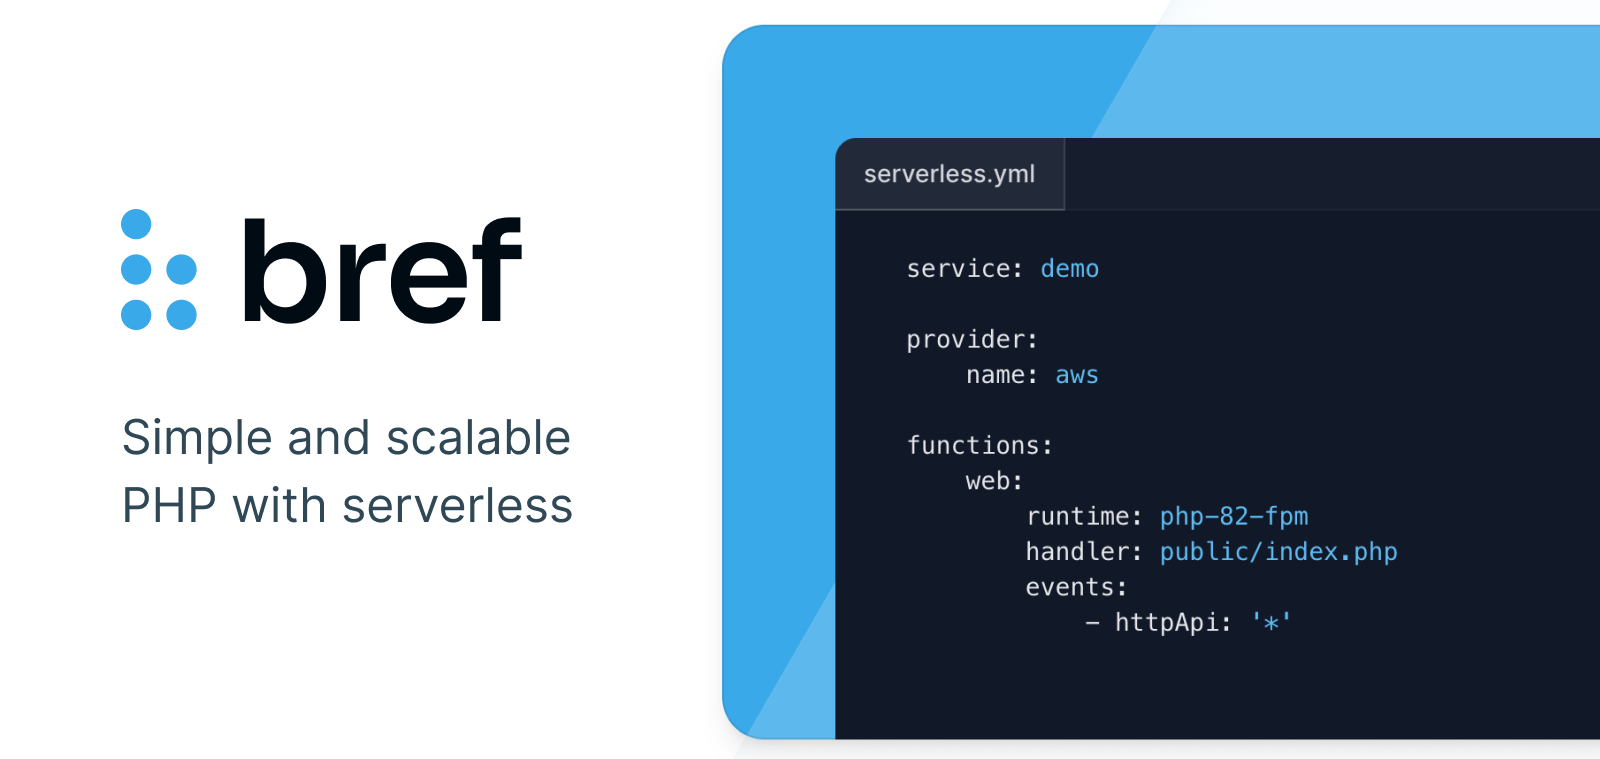 Running PHP made simple. Bref provides tools and documentation to easily deploy and run serverless PHP applications. Learn more